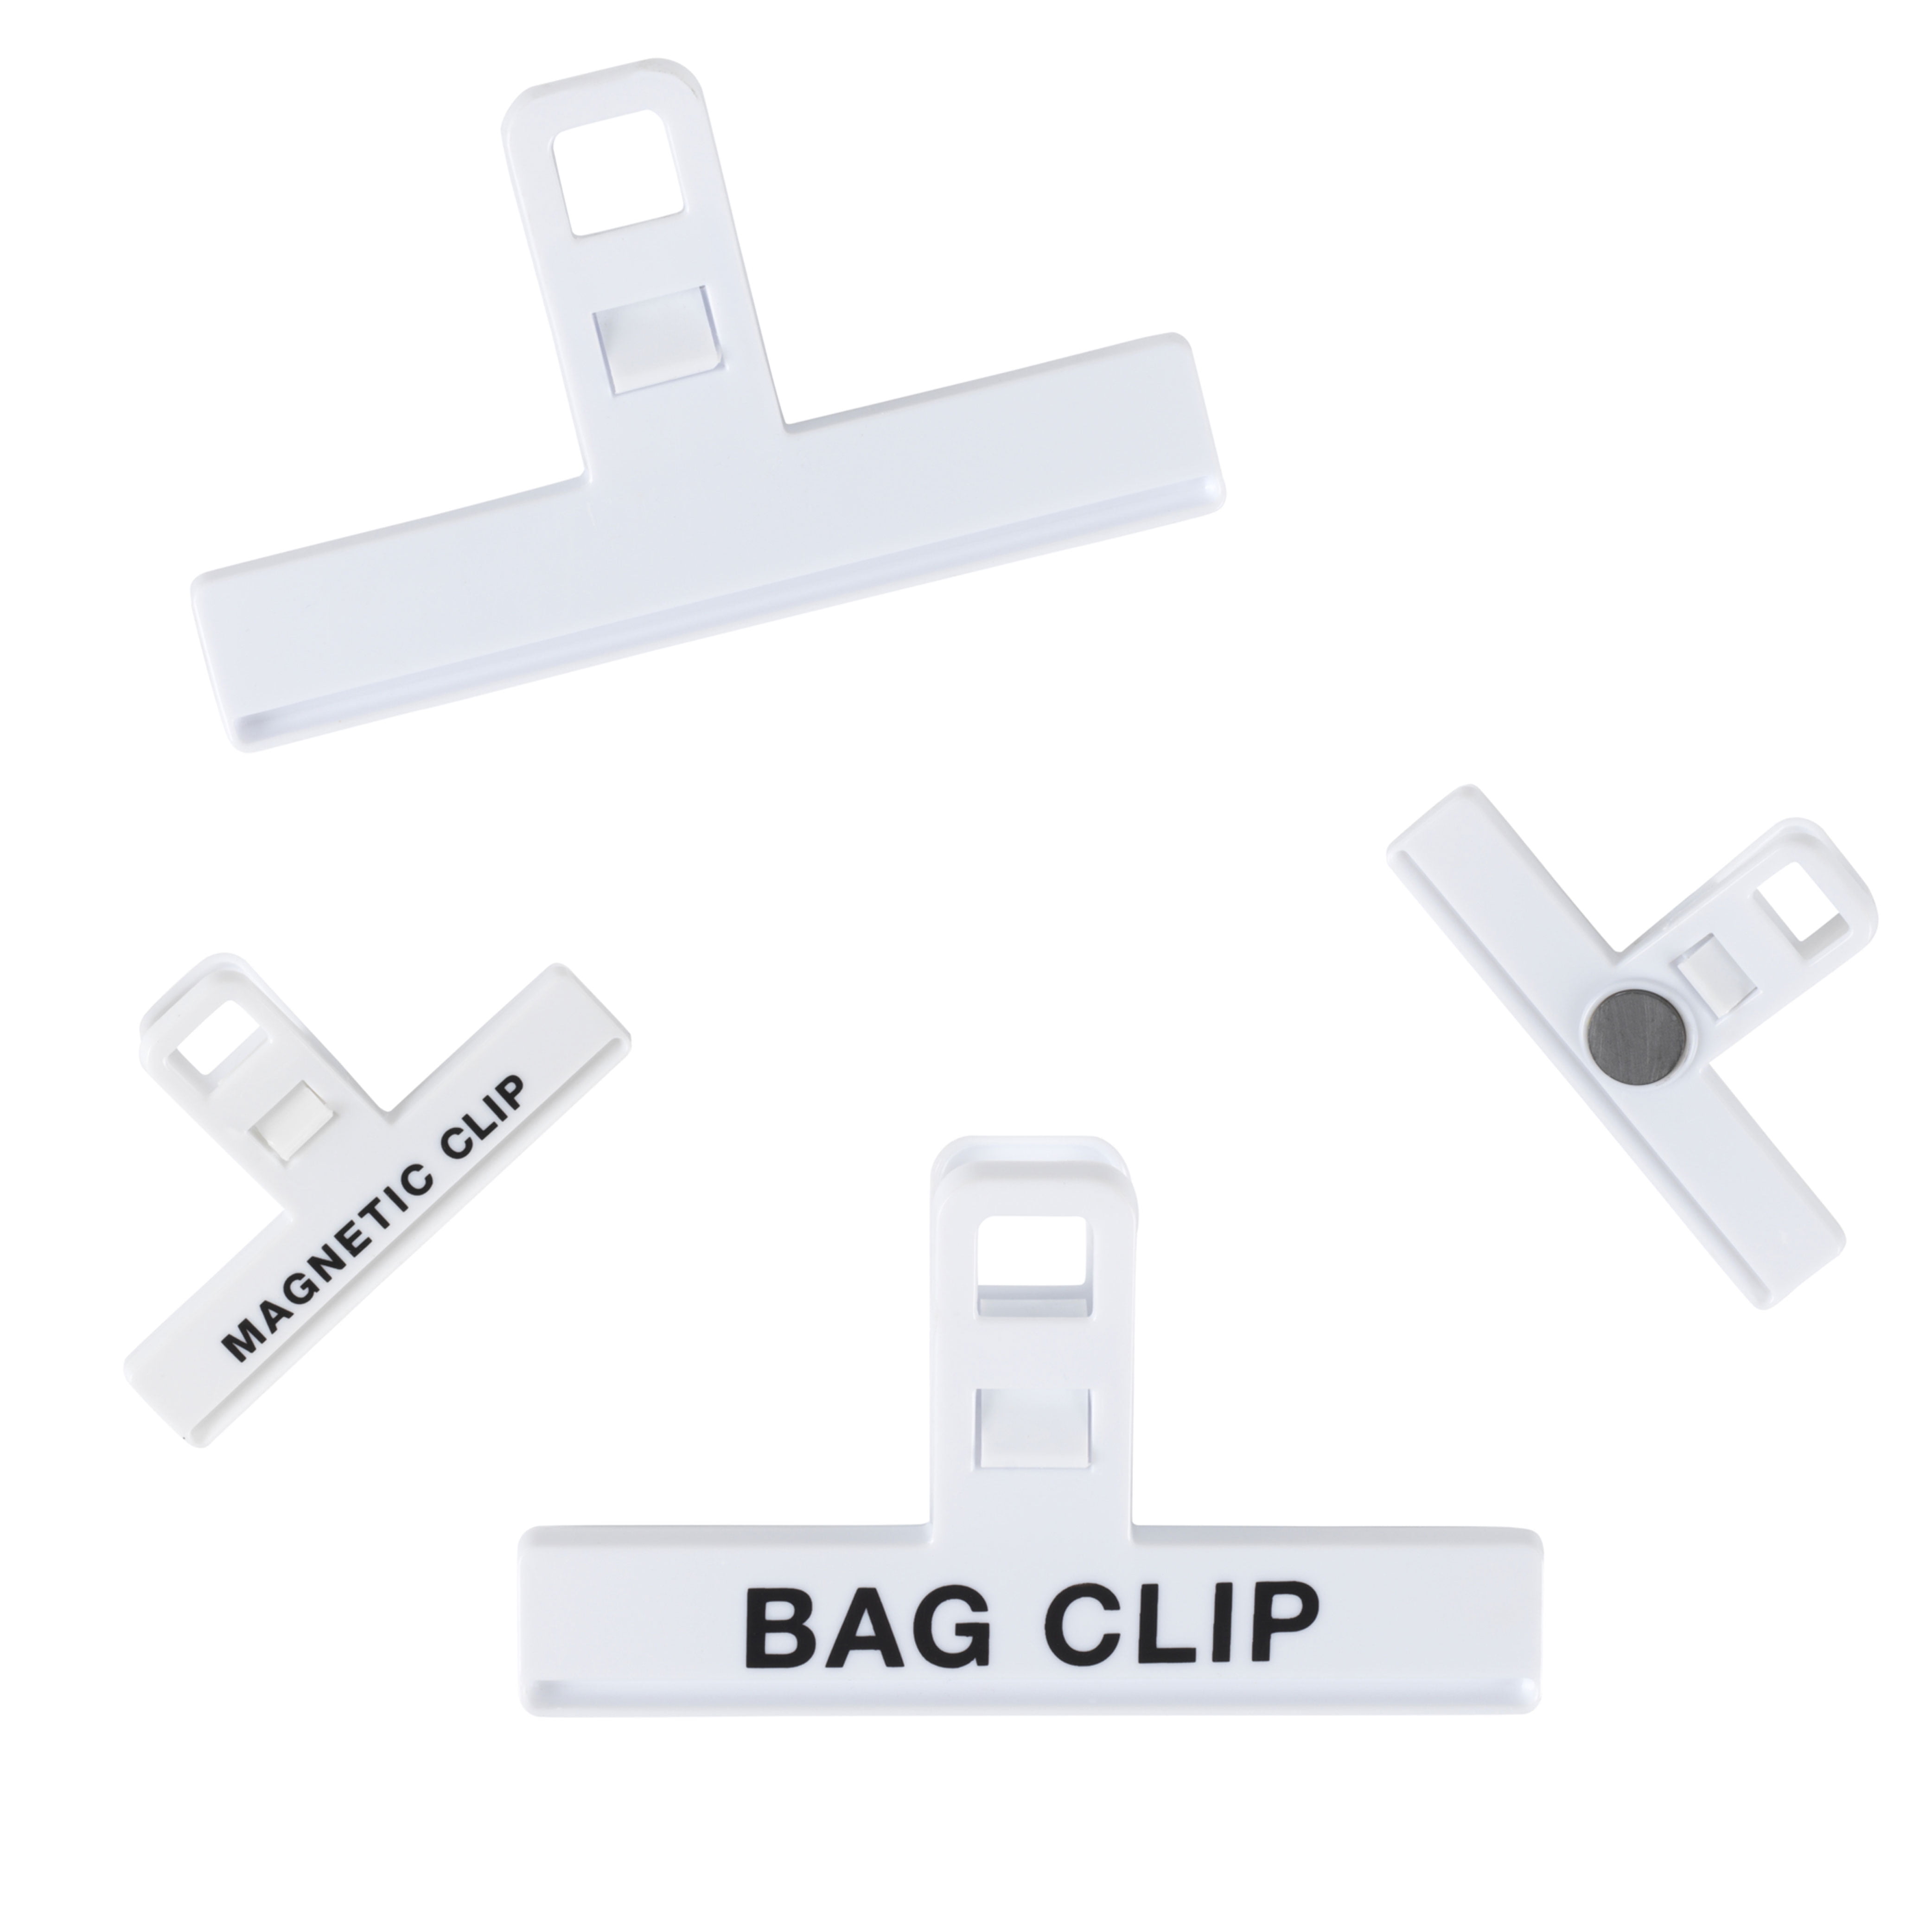 8 Piece Bag Clips Food Chip Assorted Size Multi Purpose Clothespin